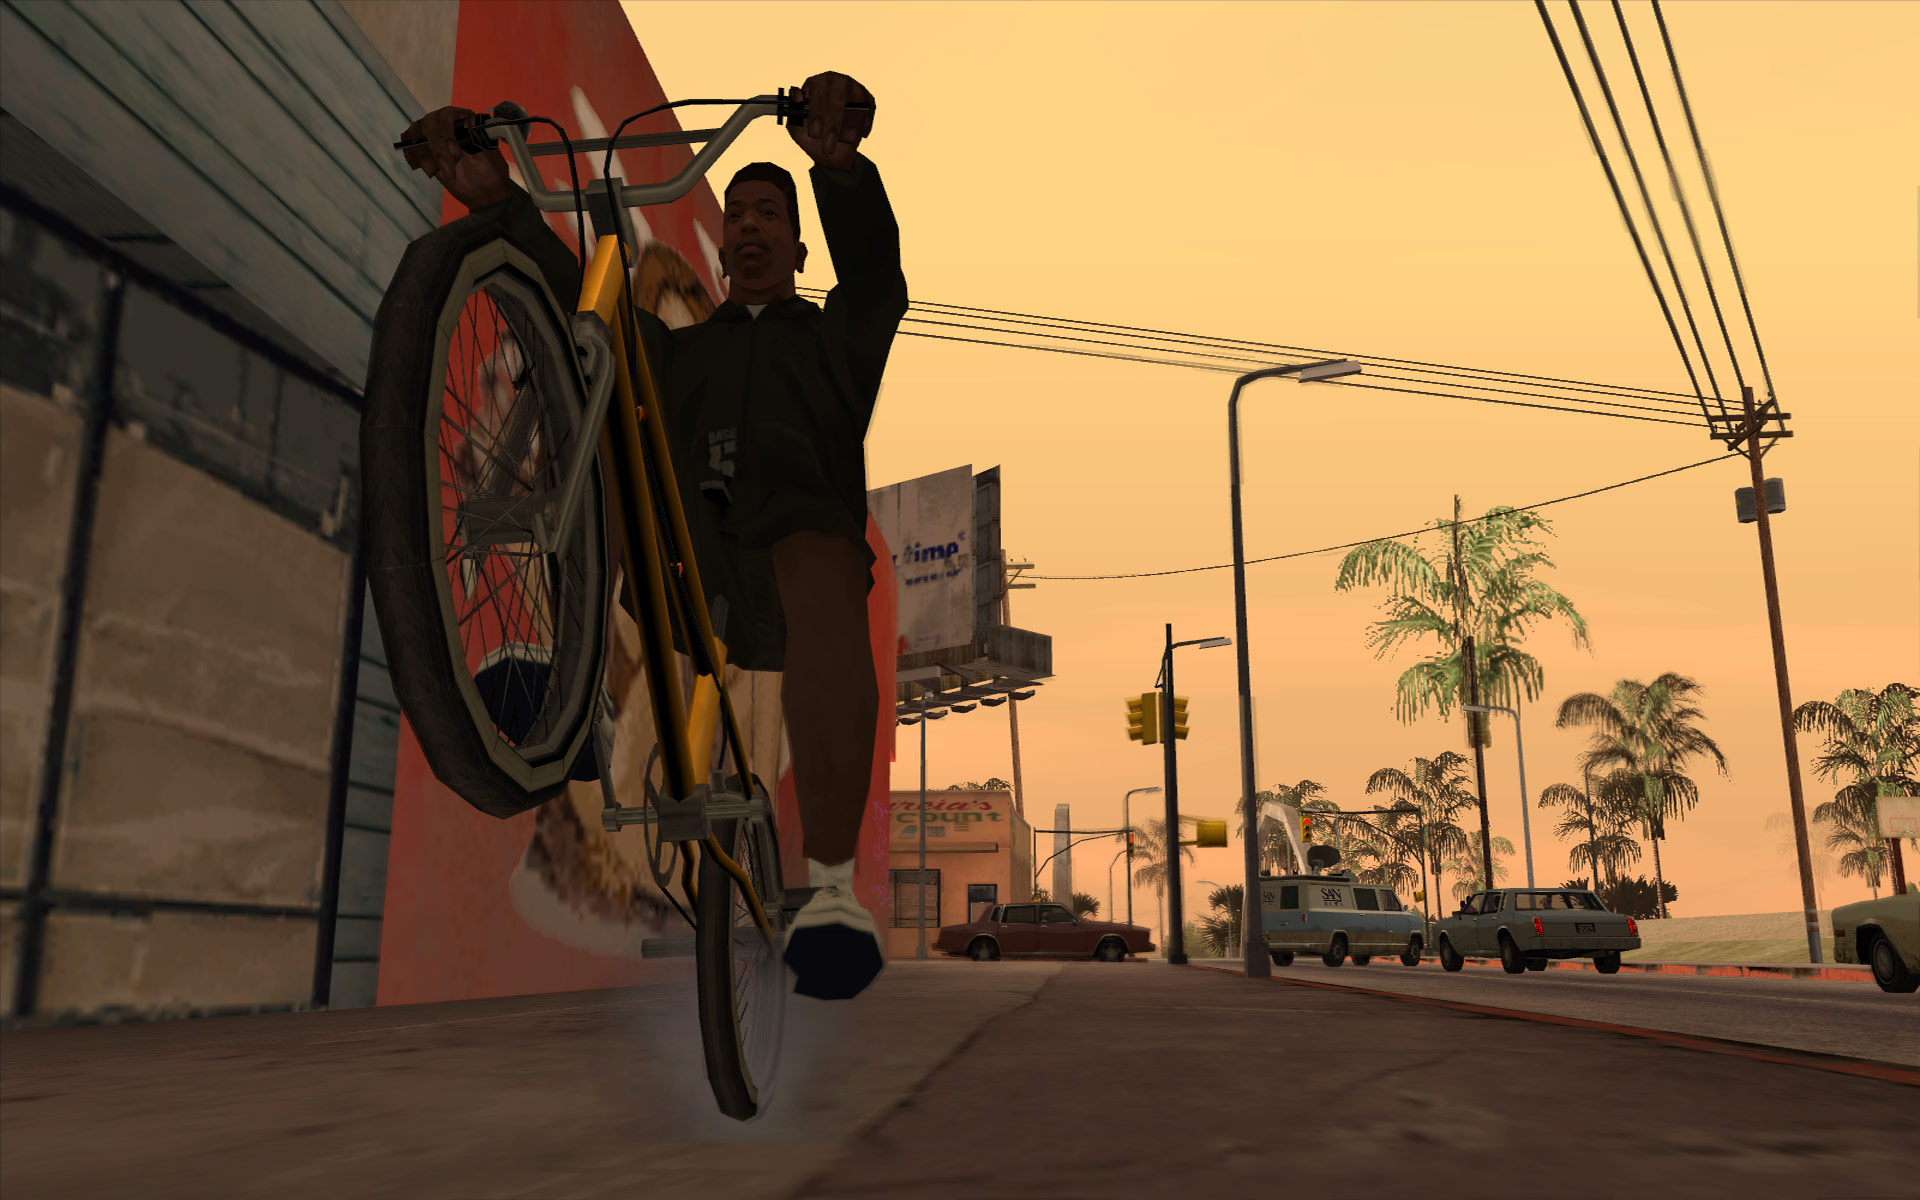 gta san andreas download for android free